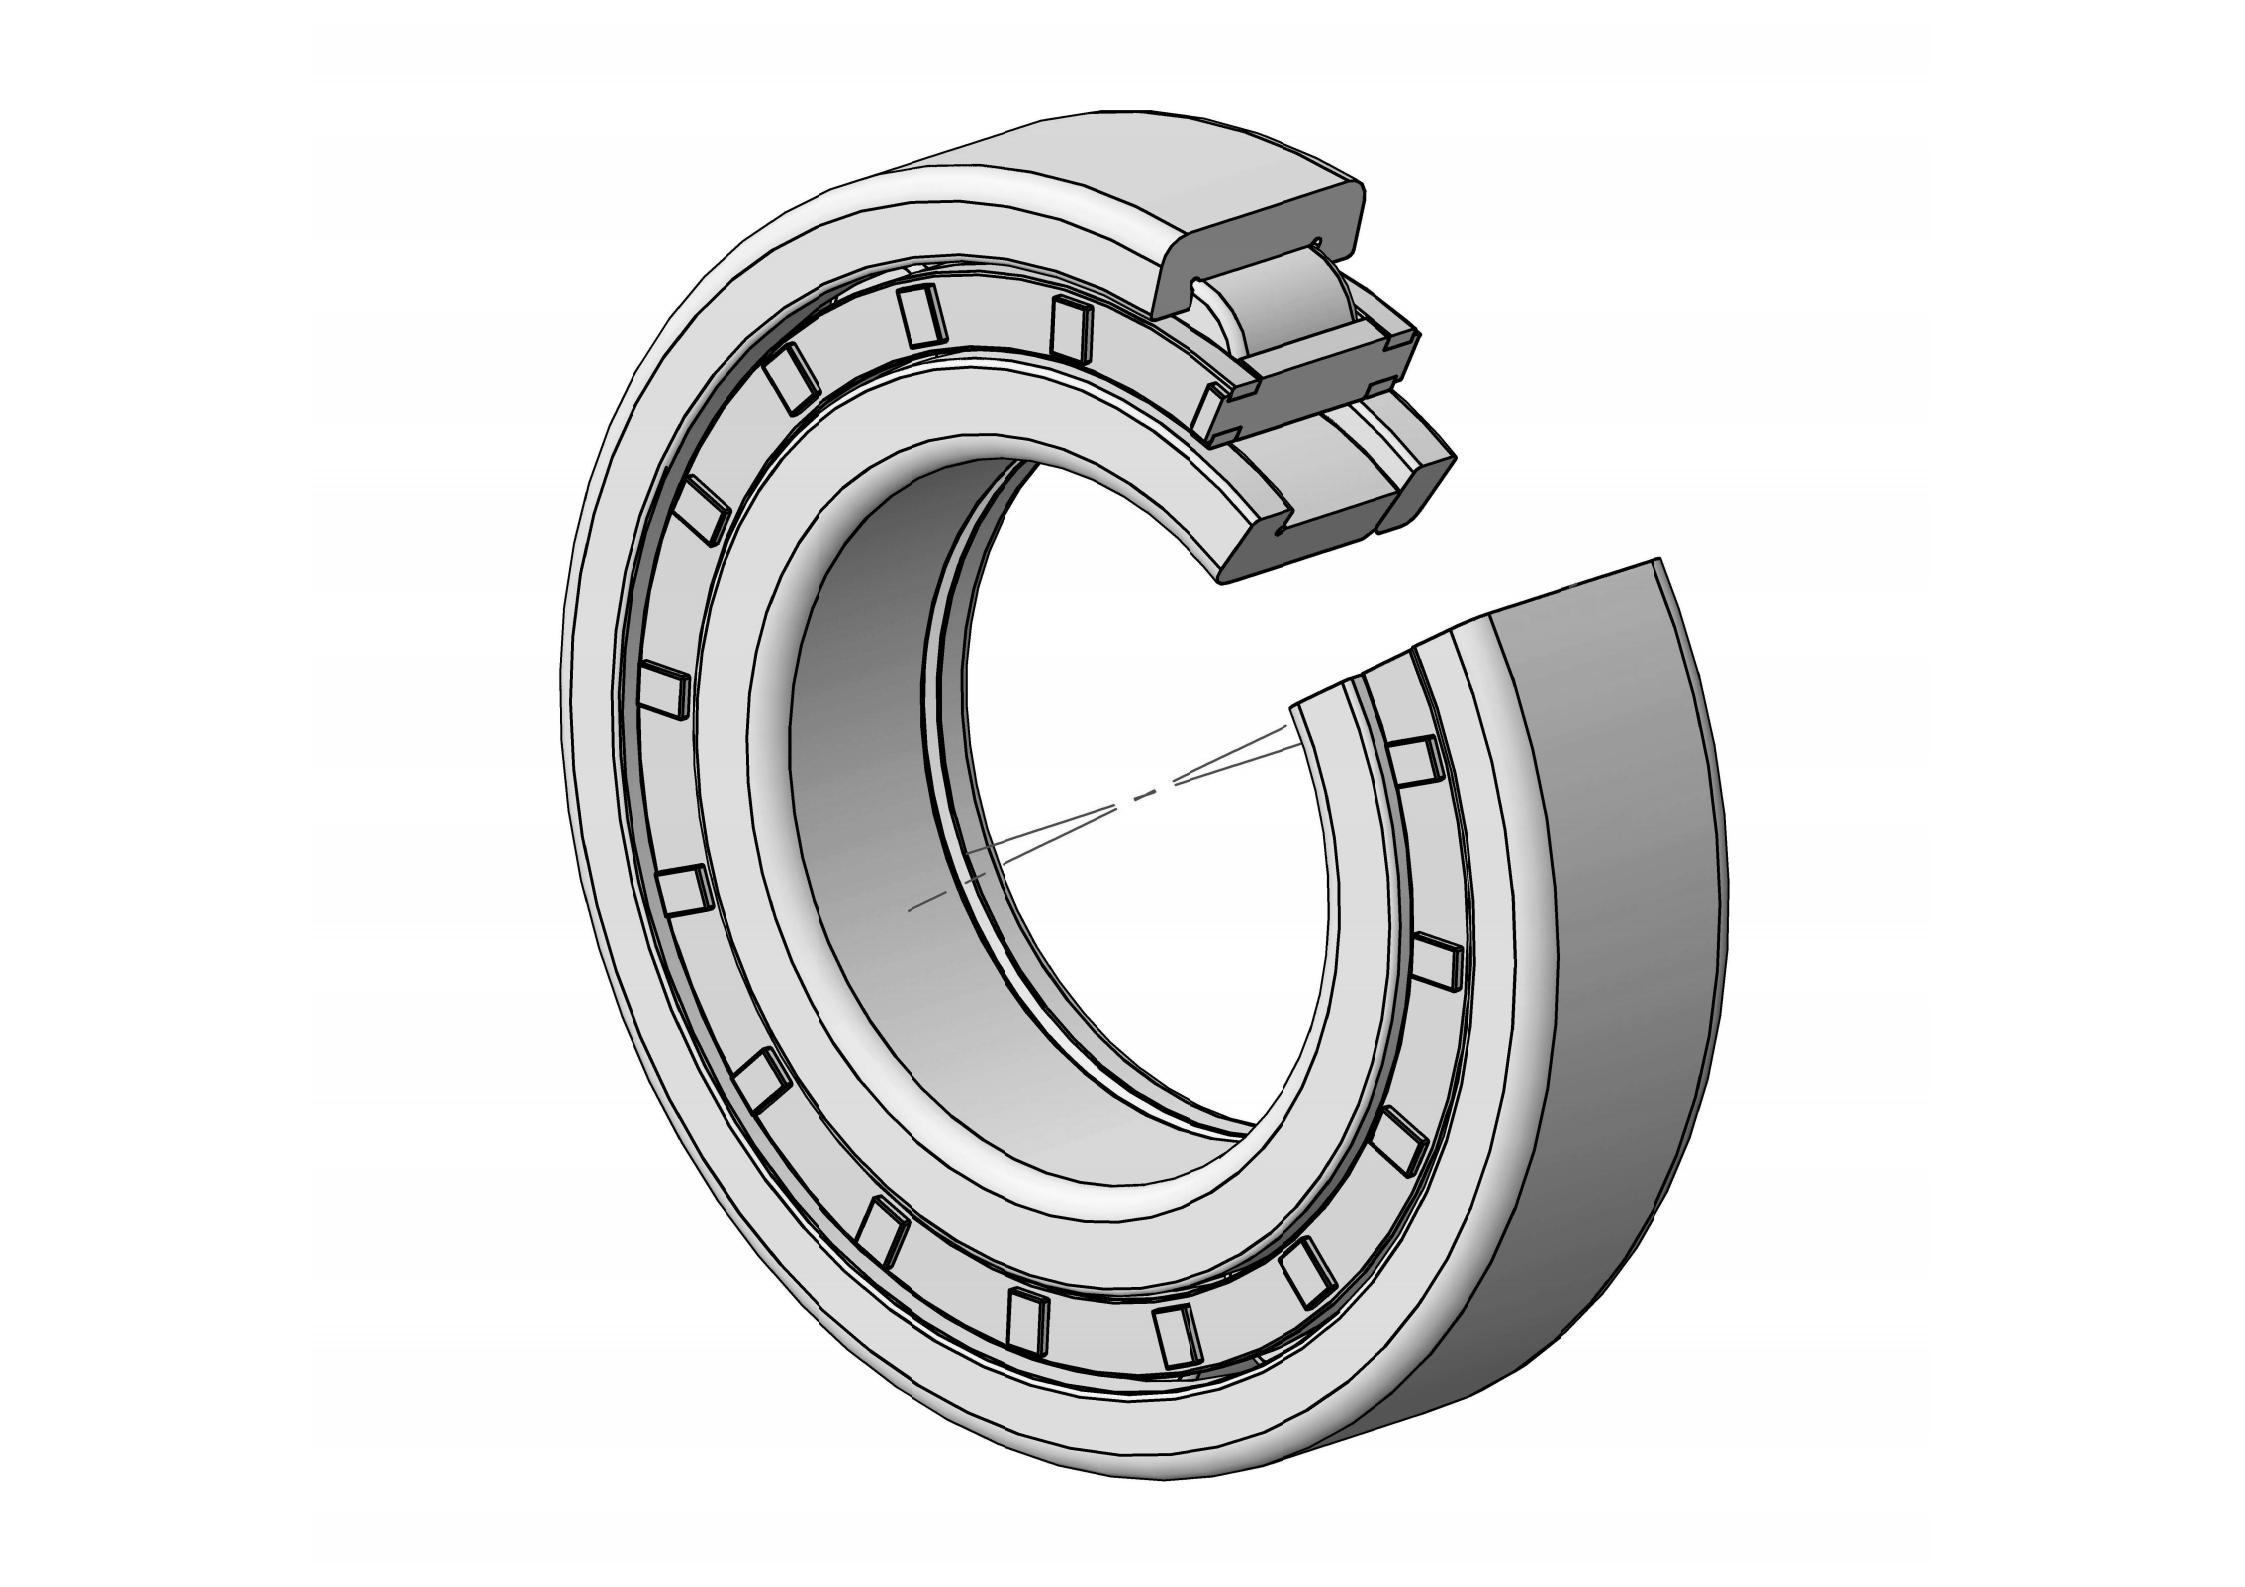 Linear bearing from Rollon handles light-to-moderate loads in linear motion applications